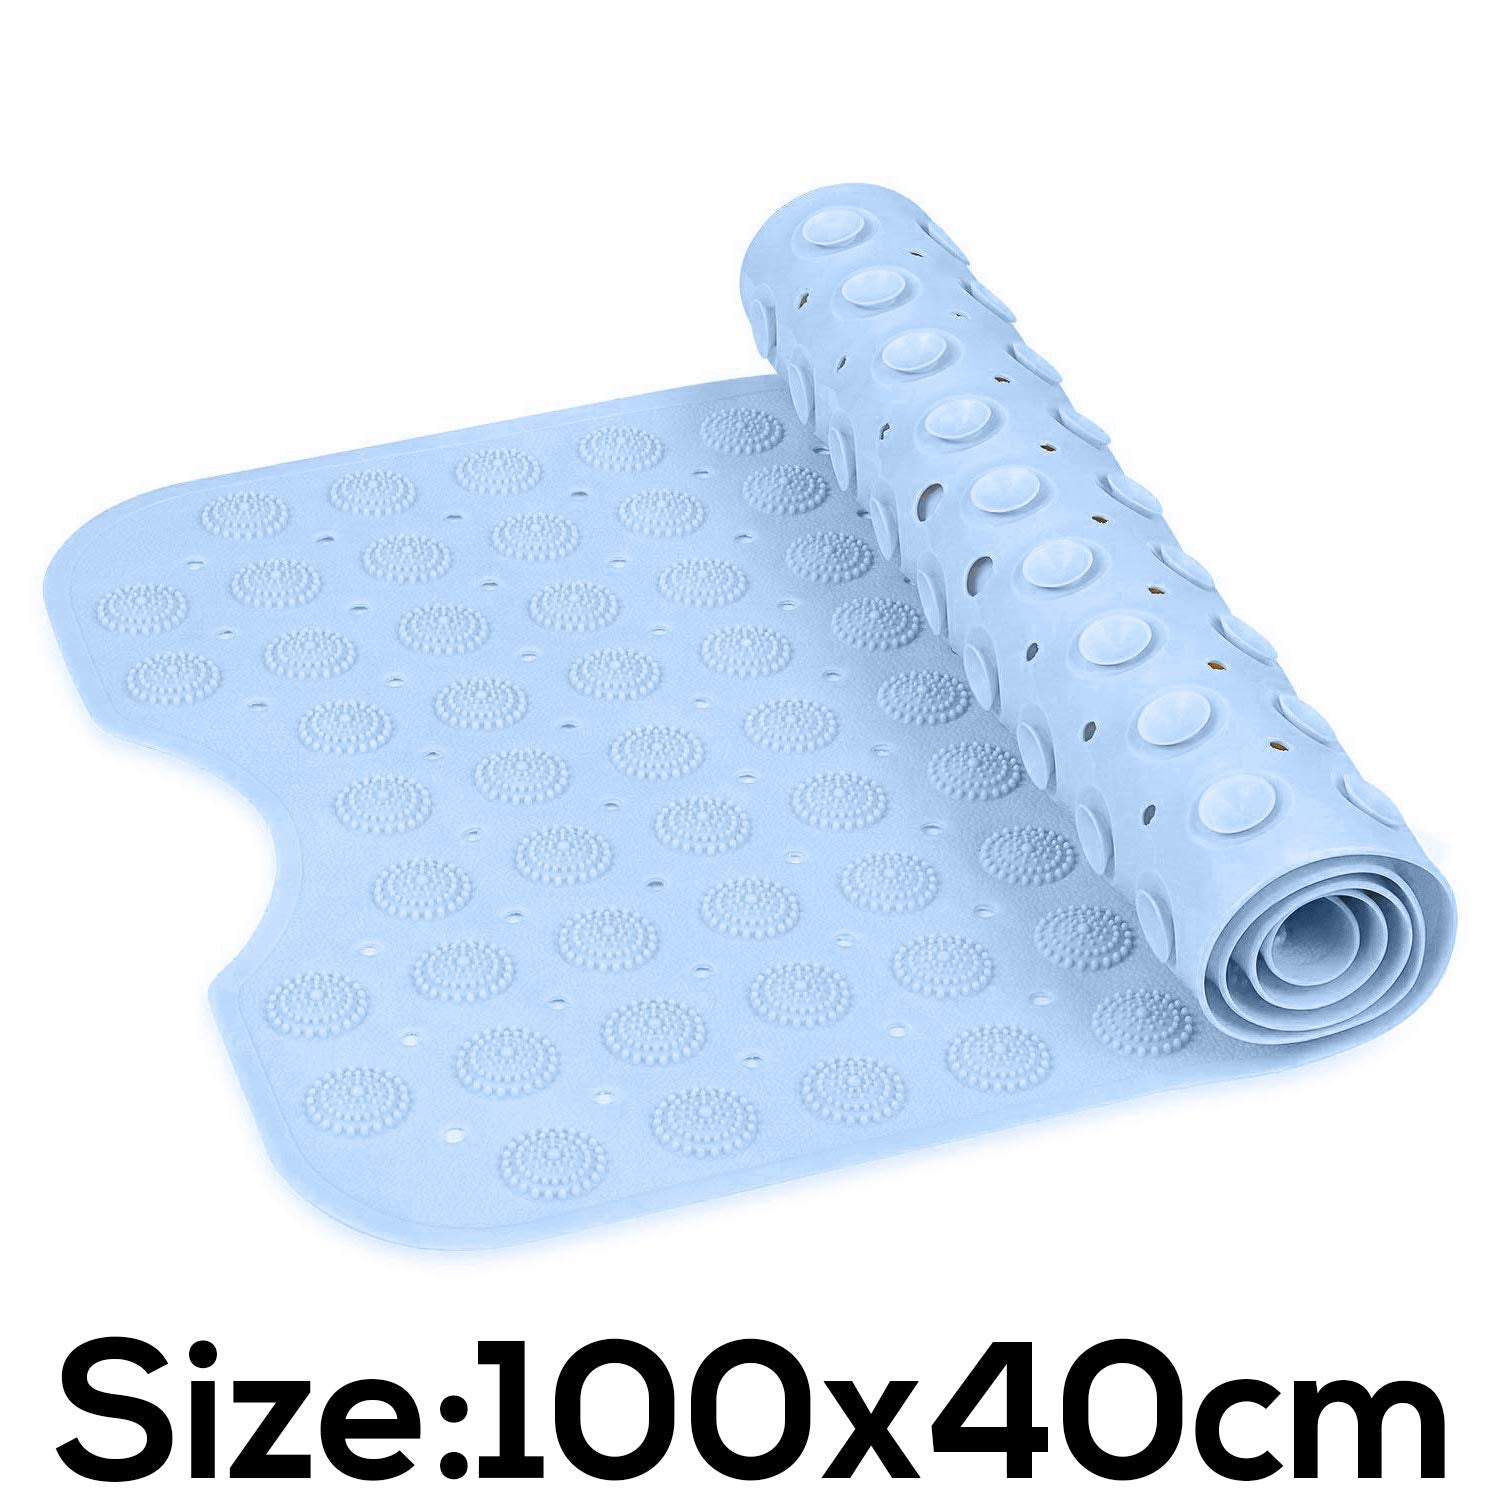 Experia Anti Slip Bath Mat with Suction Cup - 100 X 40 CM (Blue Color with Accu Pebble) LifeKrafts